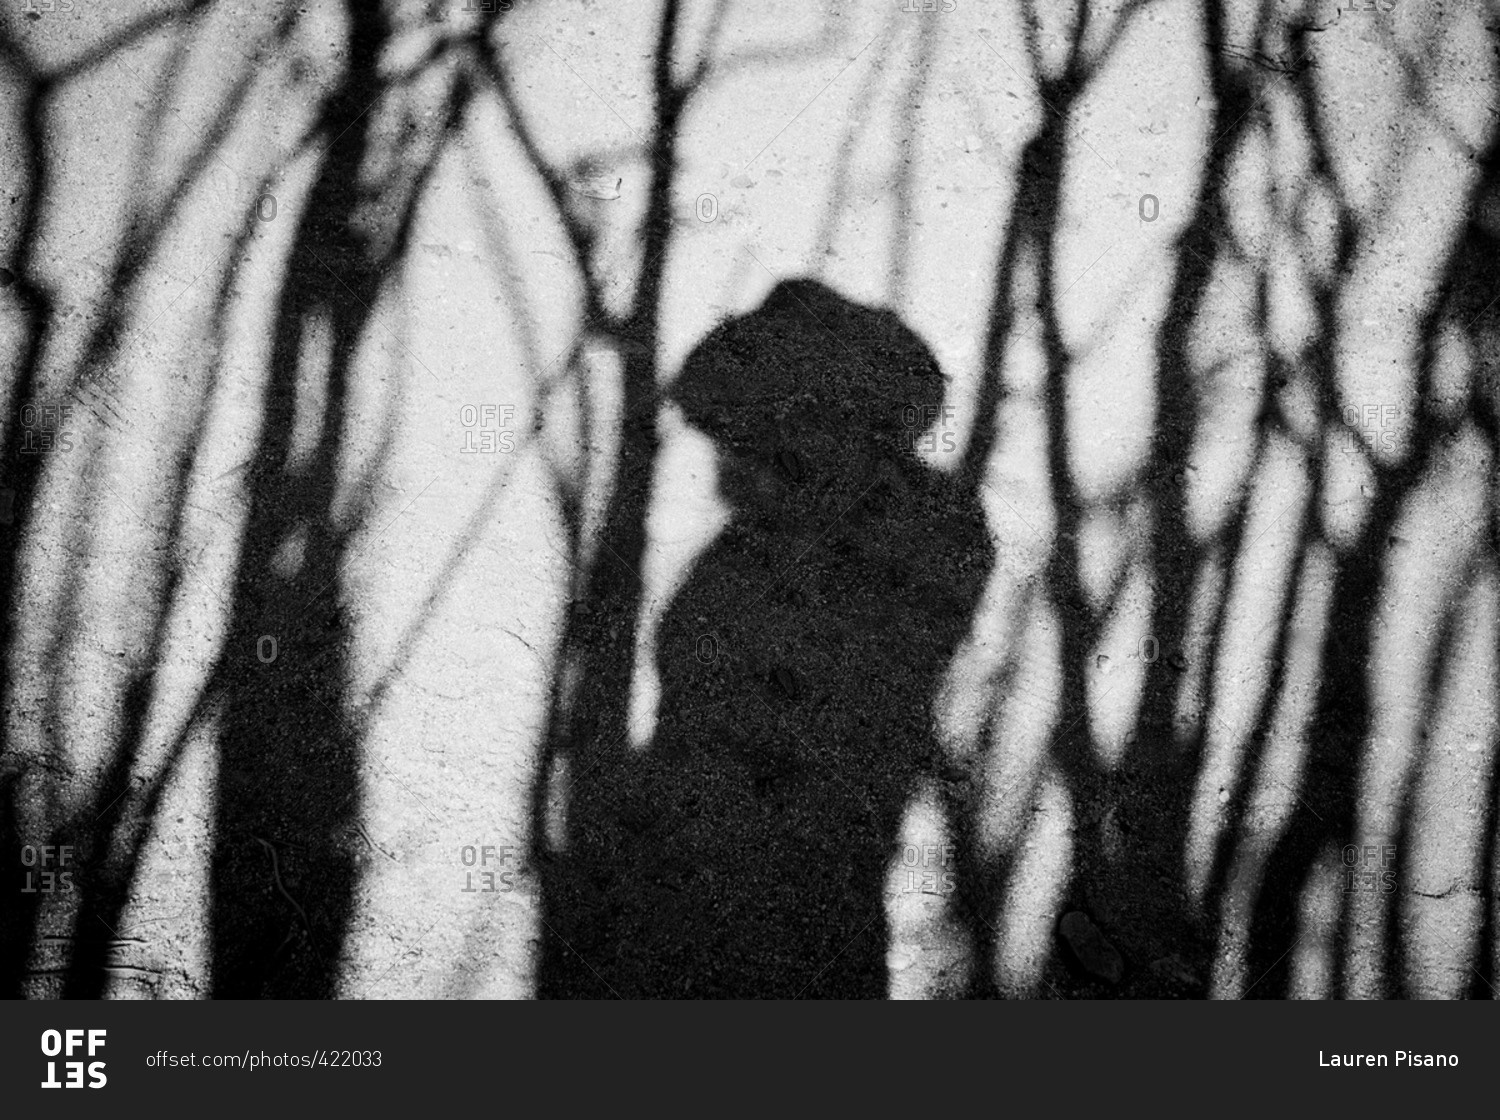 Shadow of a person standing amongst trees in Joshua Tree, California